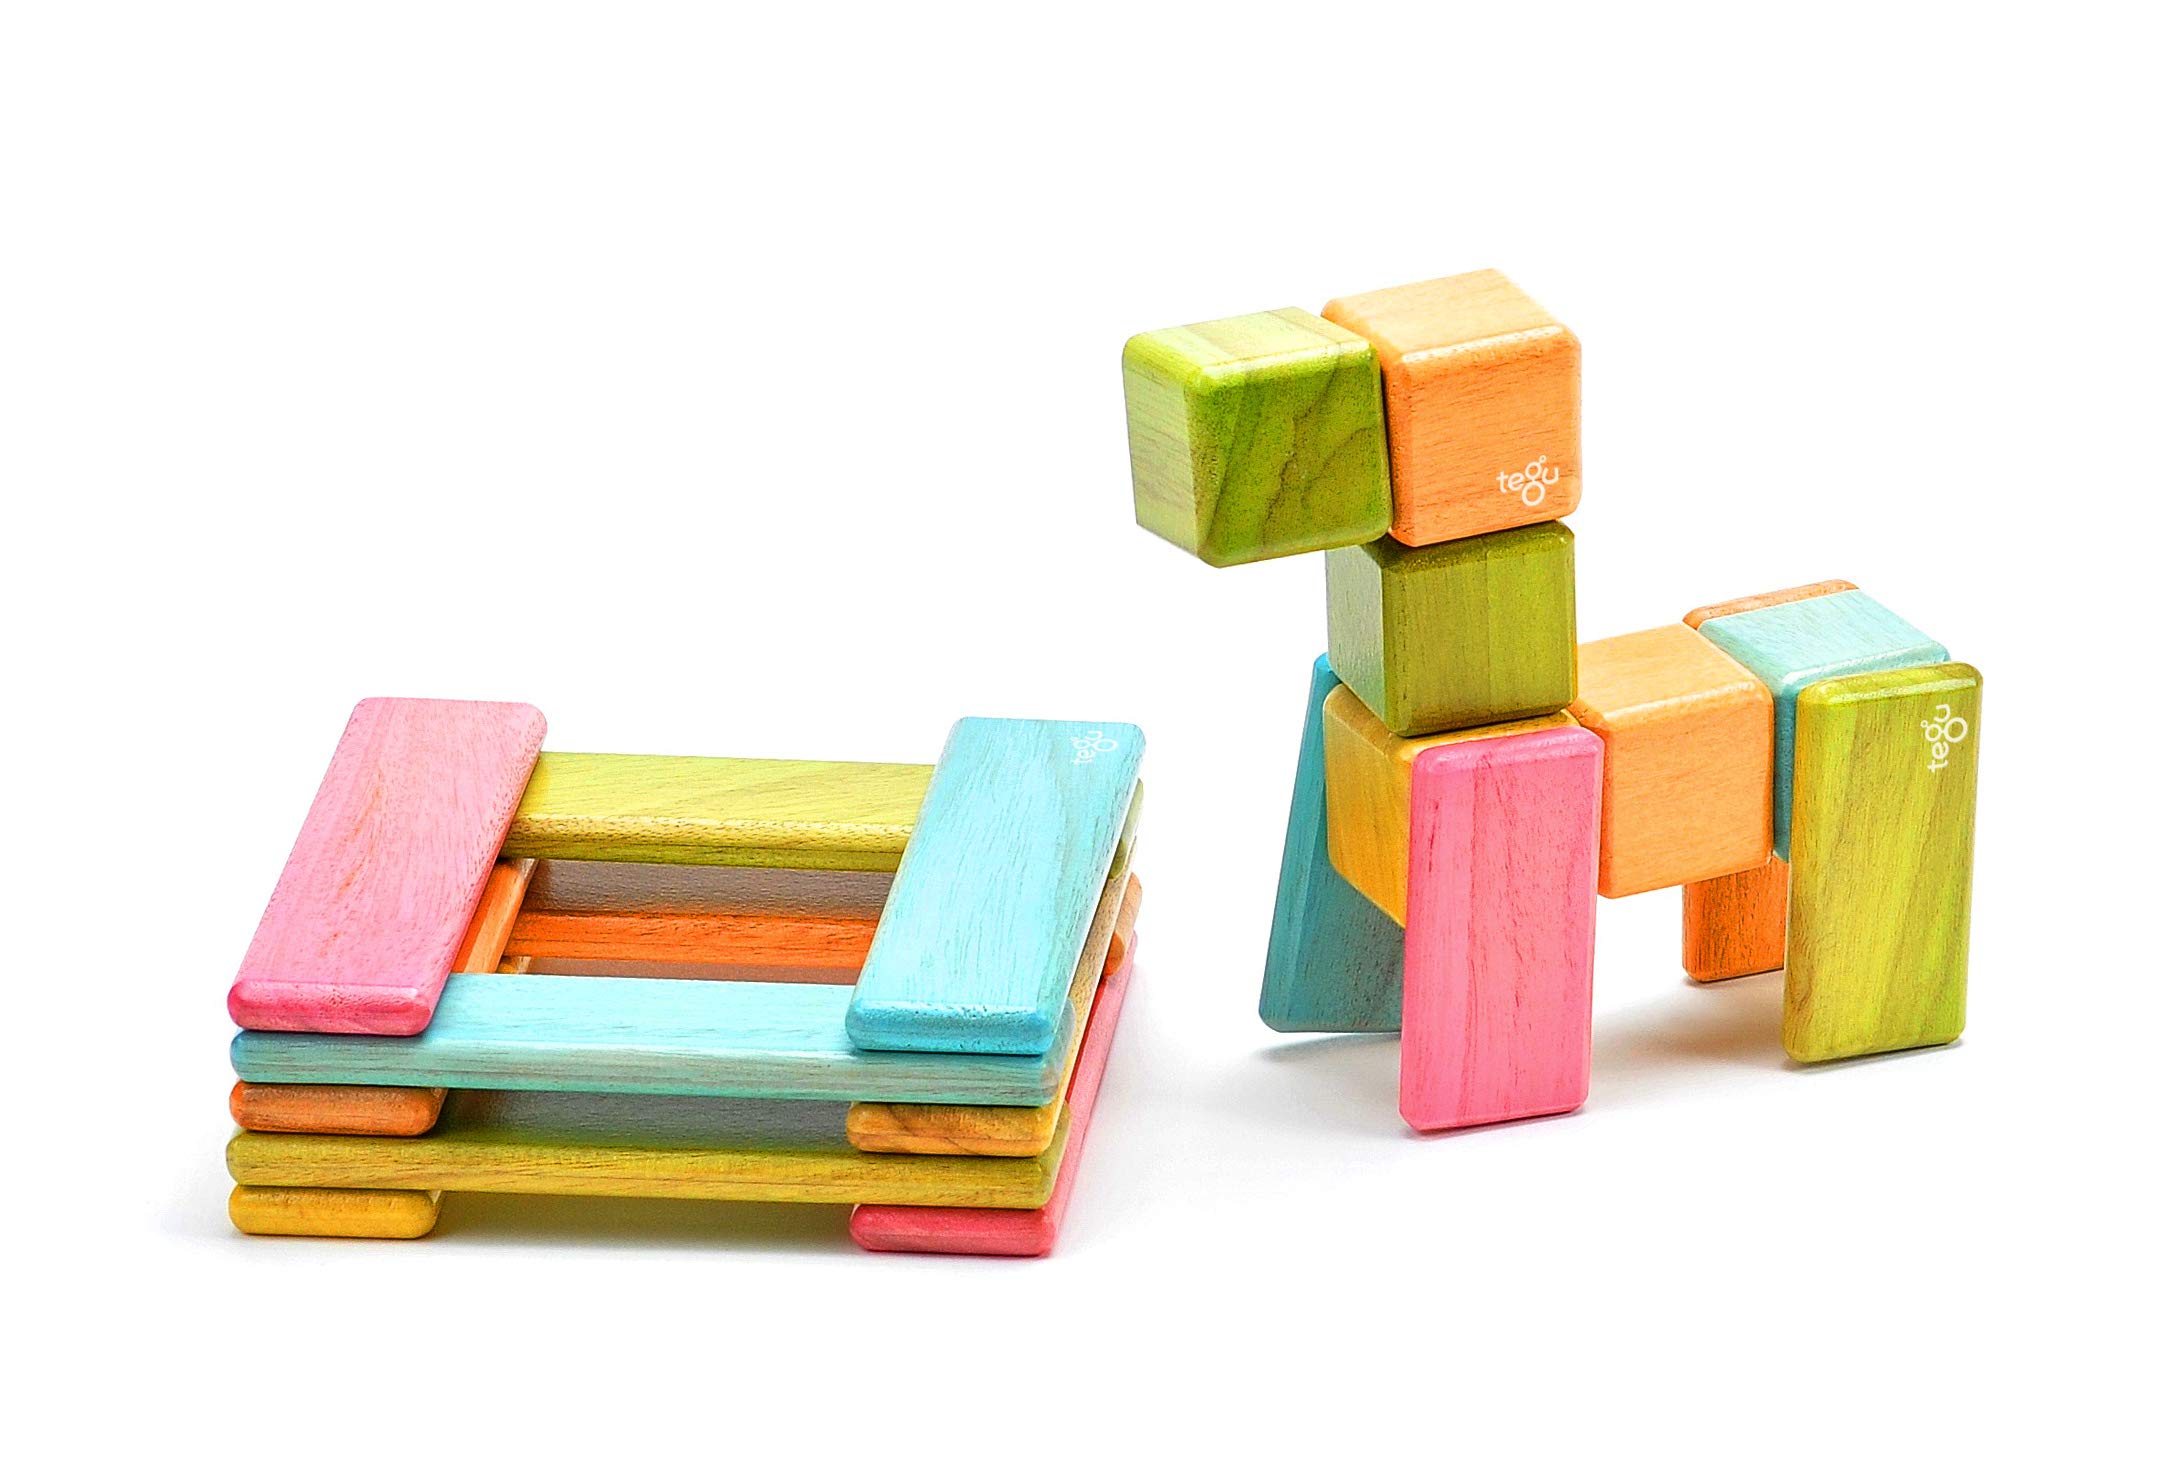 26 Piece Tegu Discovery Magnetic Wooden Block Set,1-99 years old, Tints